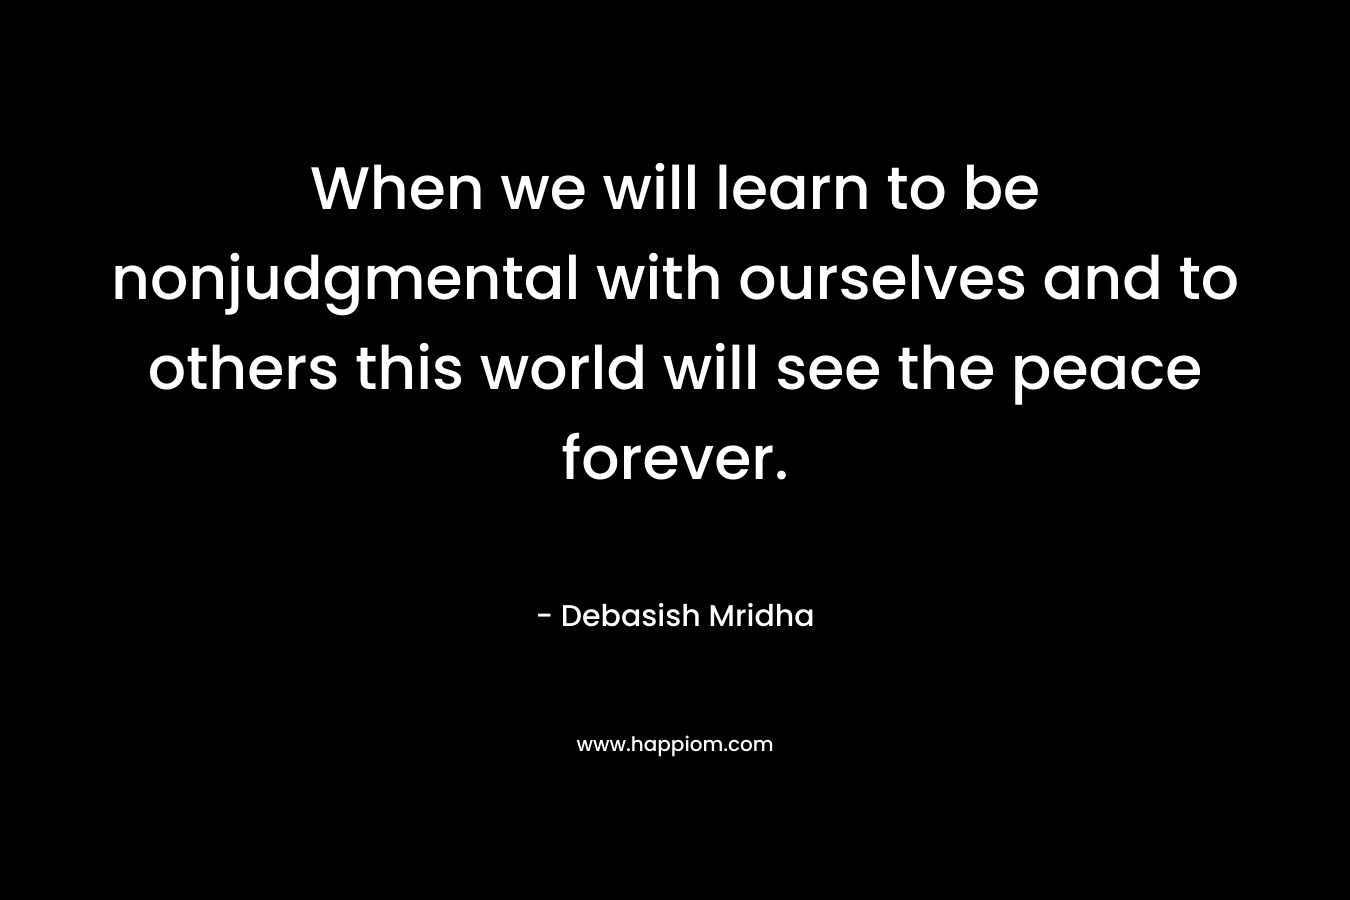 When we will learn to be nonjudgmental with ourselves and to others this world will see the peace forever.